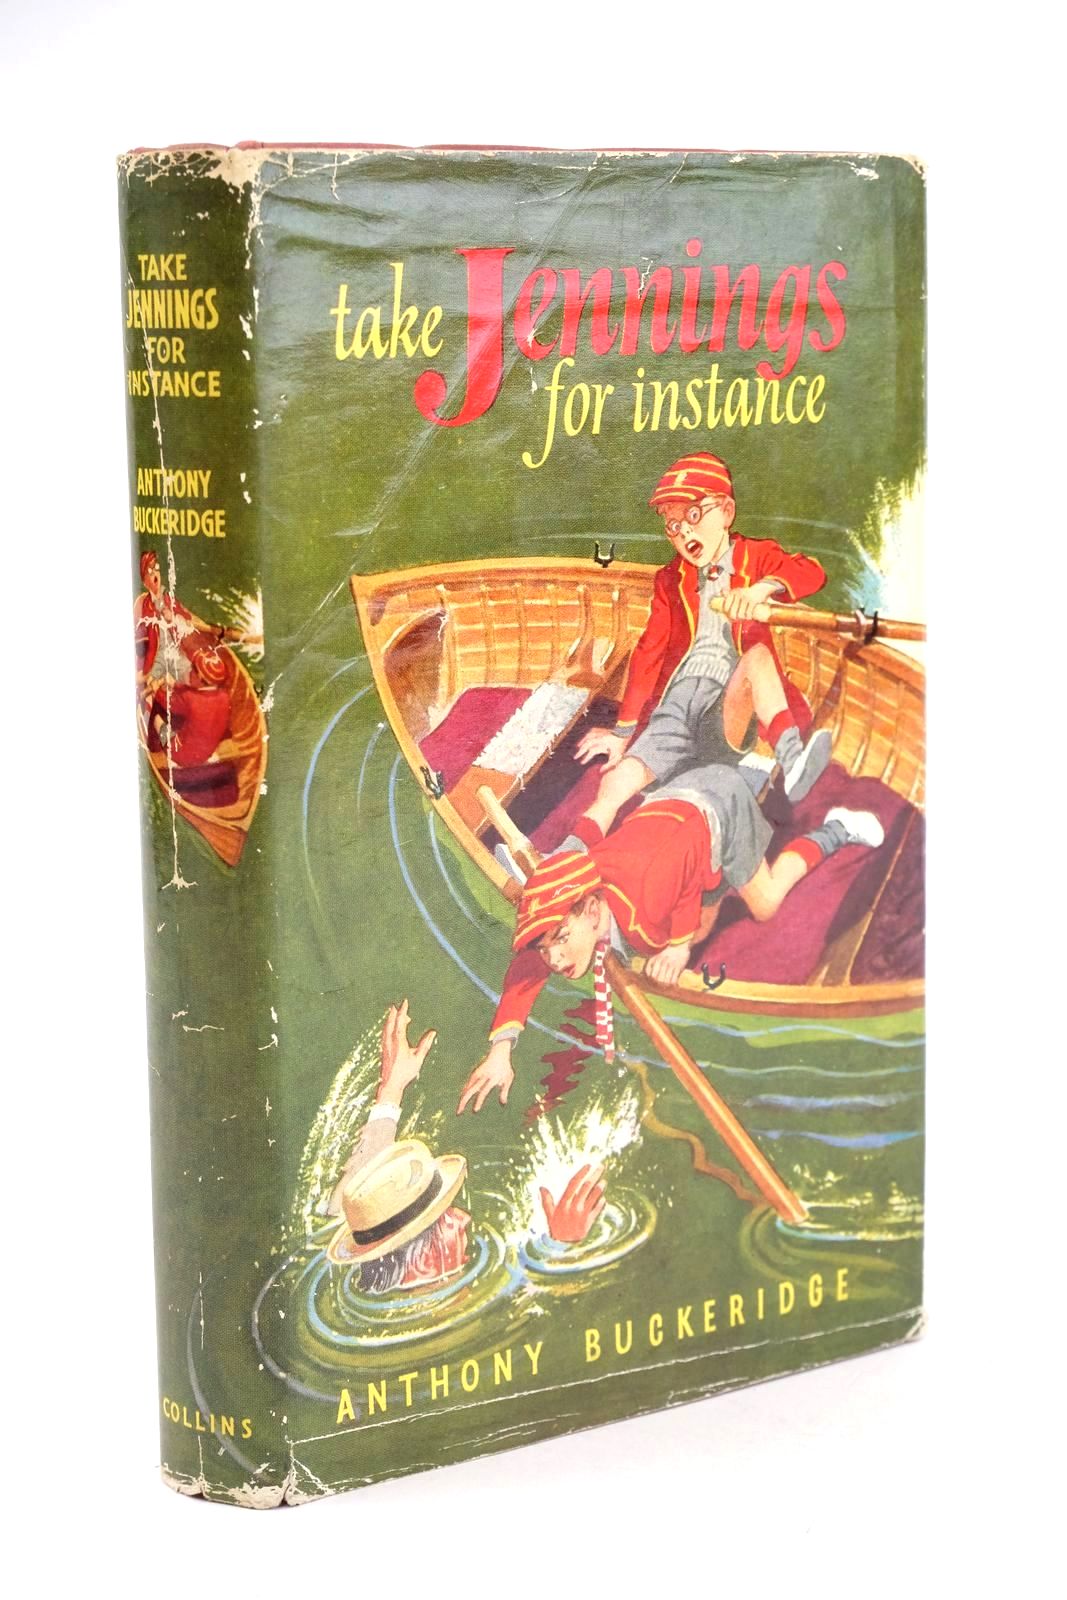 Photo of TAKE JENNINGS FOR INSTANCE written by Buckeridge, Anthony illustrated by Mays,  published by Collins (STOCK CODE: 1324537)  for sale by Stella & Rose's Books